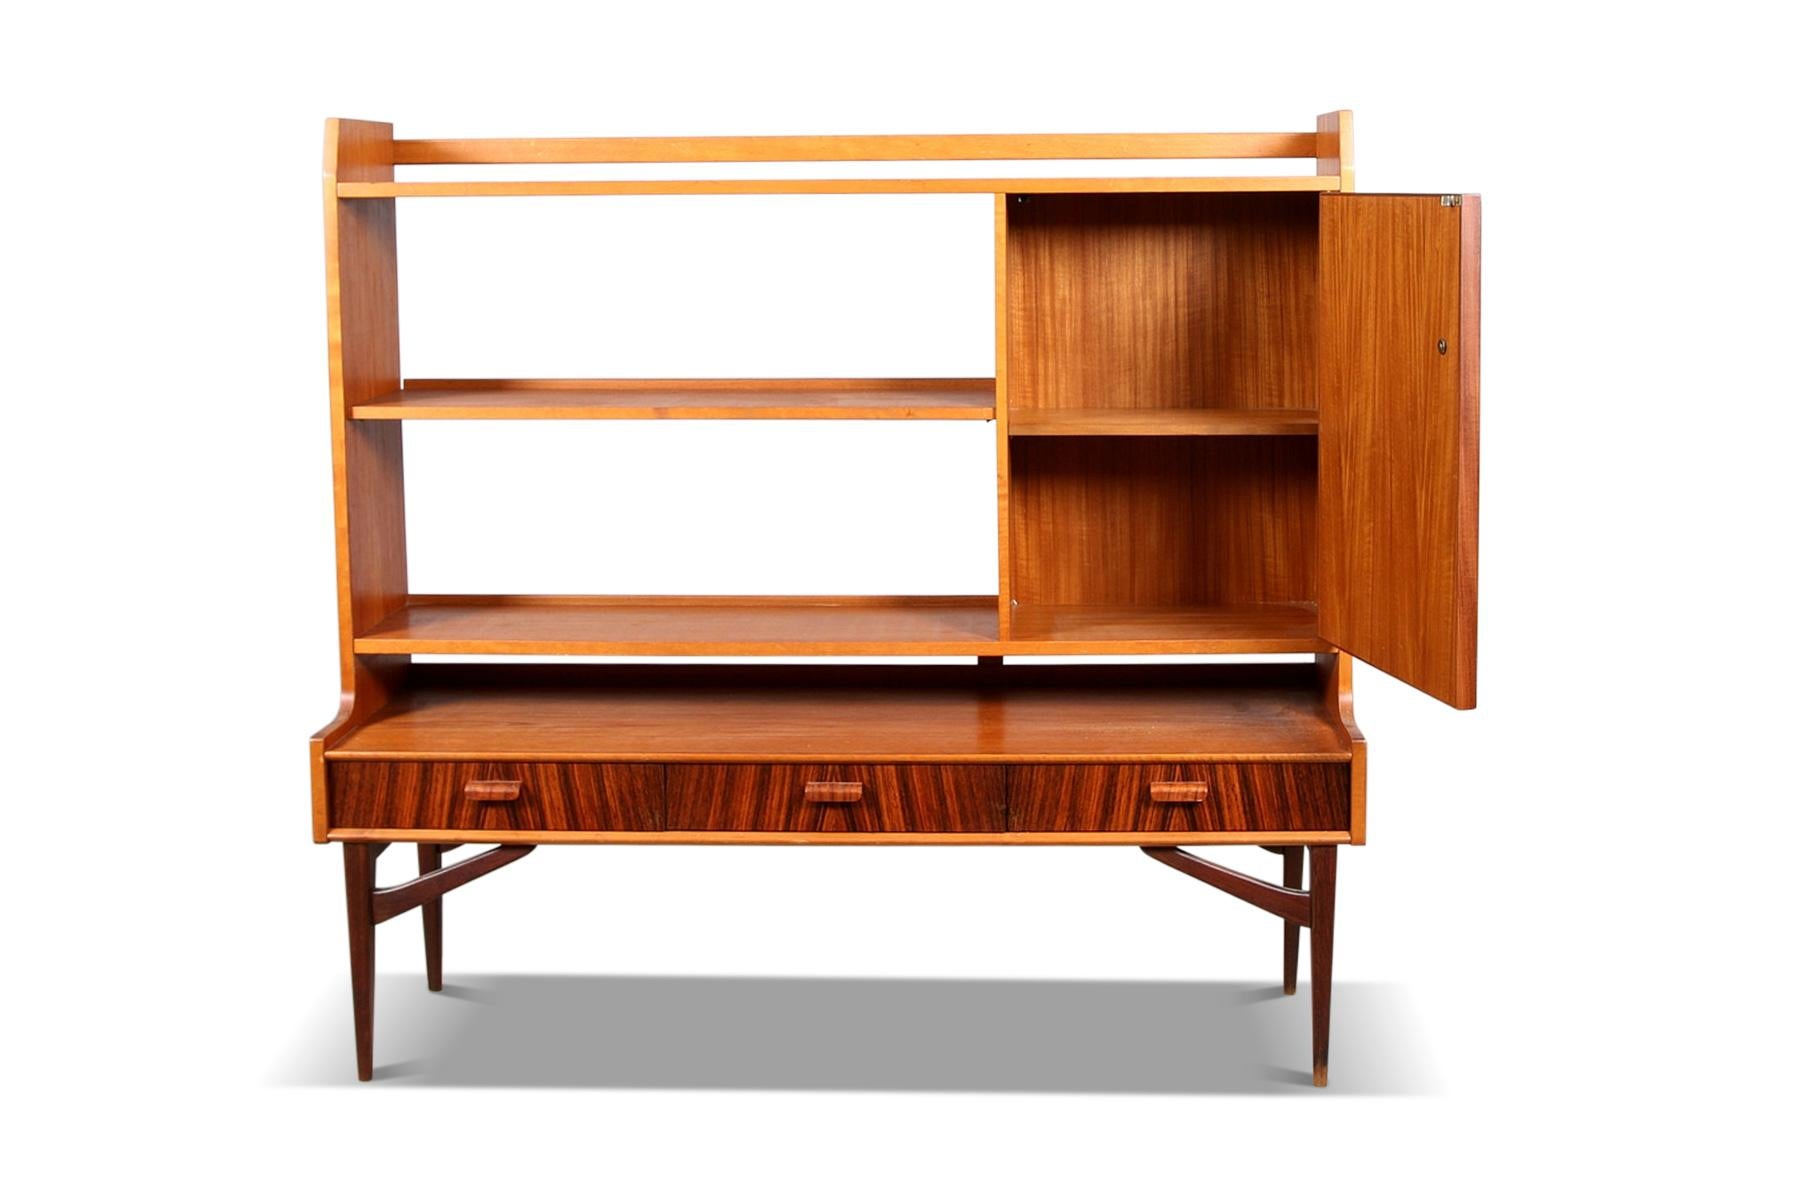 Narrow 1950s Bookcase / Wall Unit in Teak, Jacaranda + Cane In Excellent Condition For Sale In Berkeley, CA